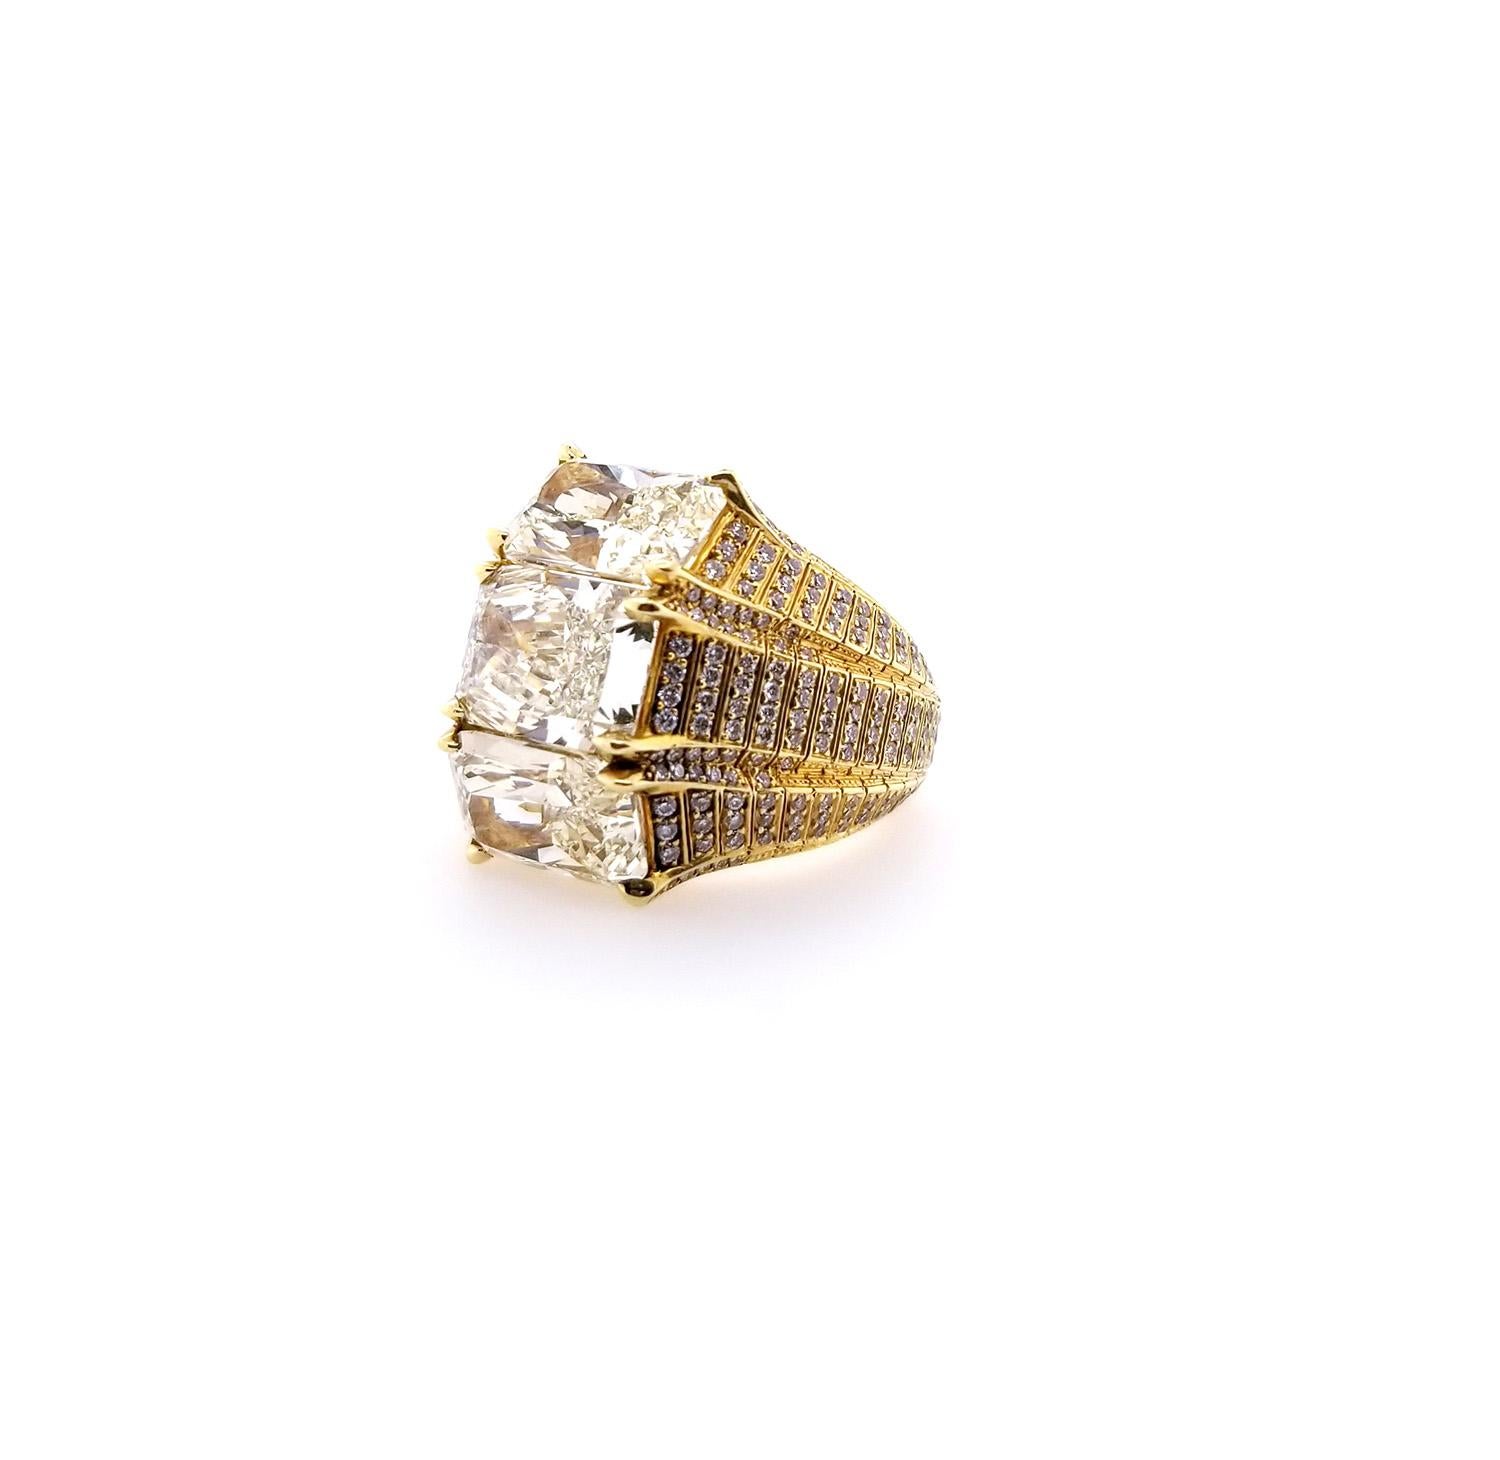 Mounted in 18k yellow gold with full cuts that has a total weight of  1.12 carats. 
3 Yellow Radiant Cut Diamonds  - 7.74 carats total weight
